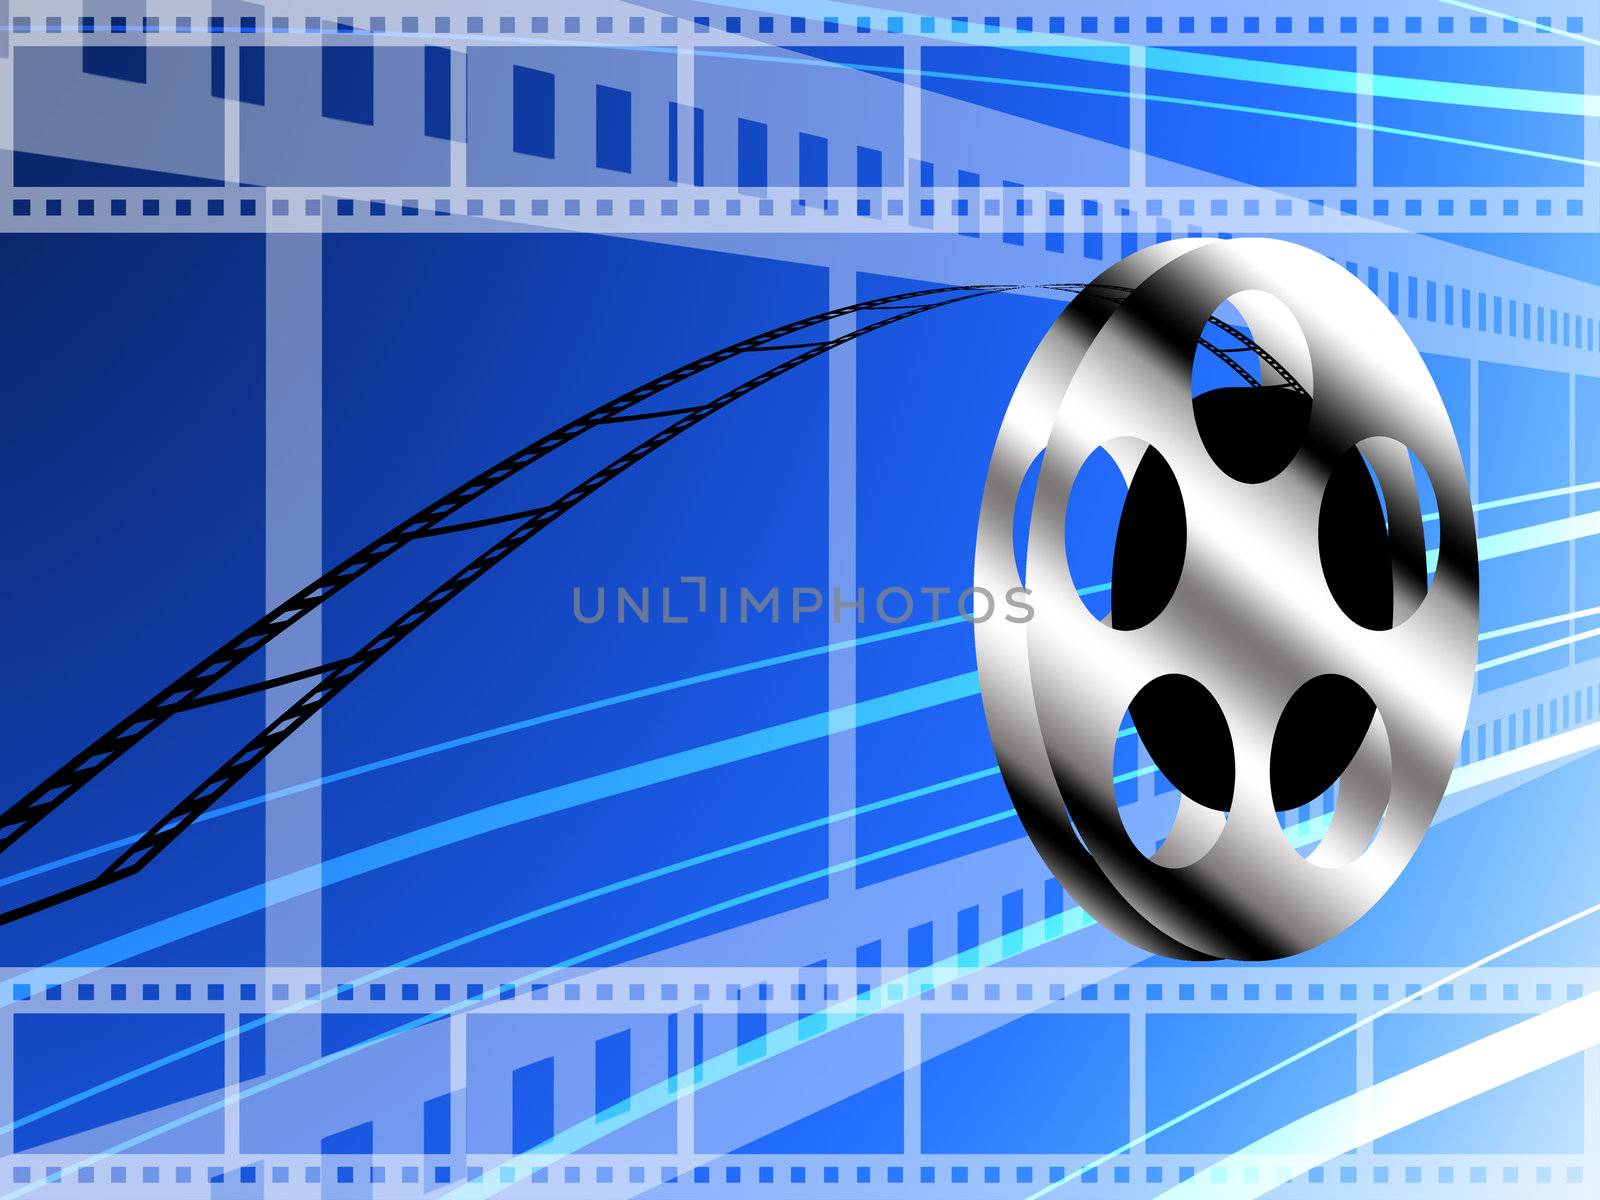 Film technology concept, Film roll background by pixbox77